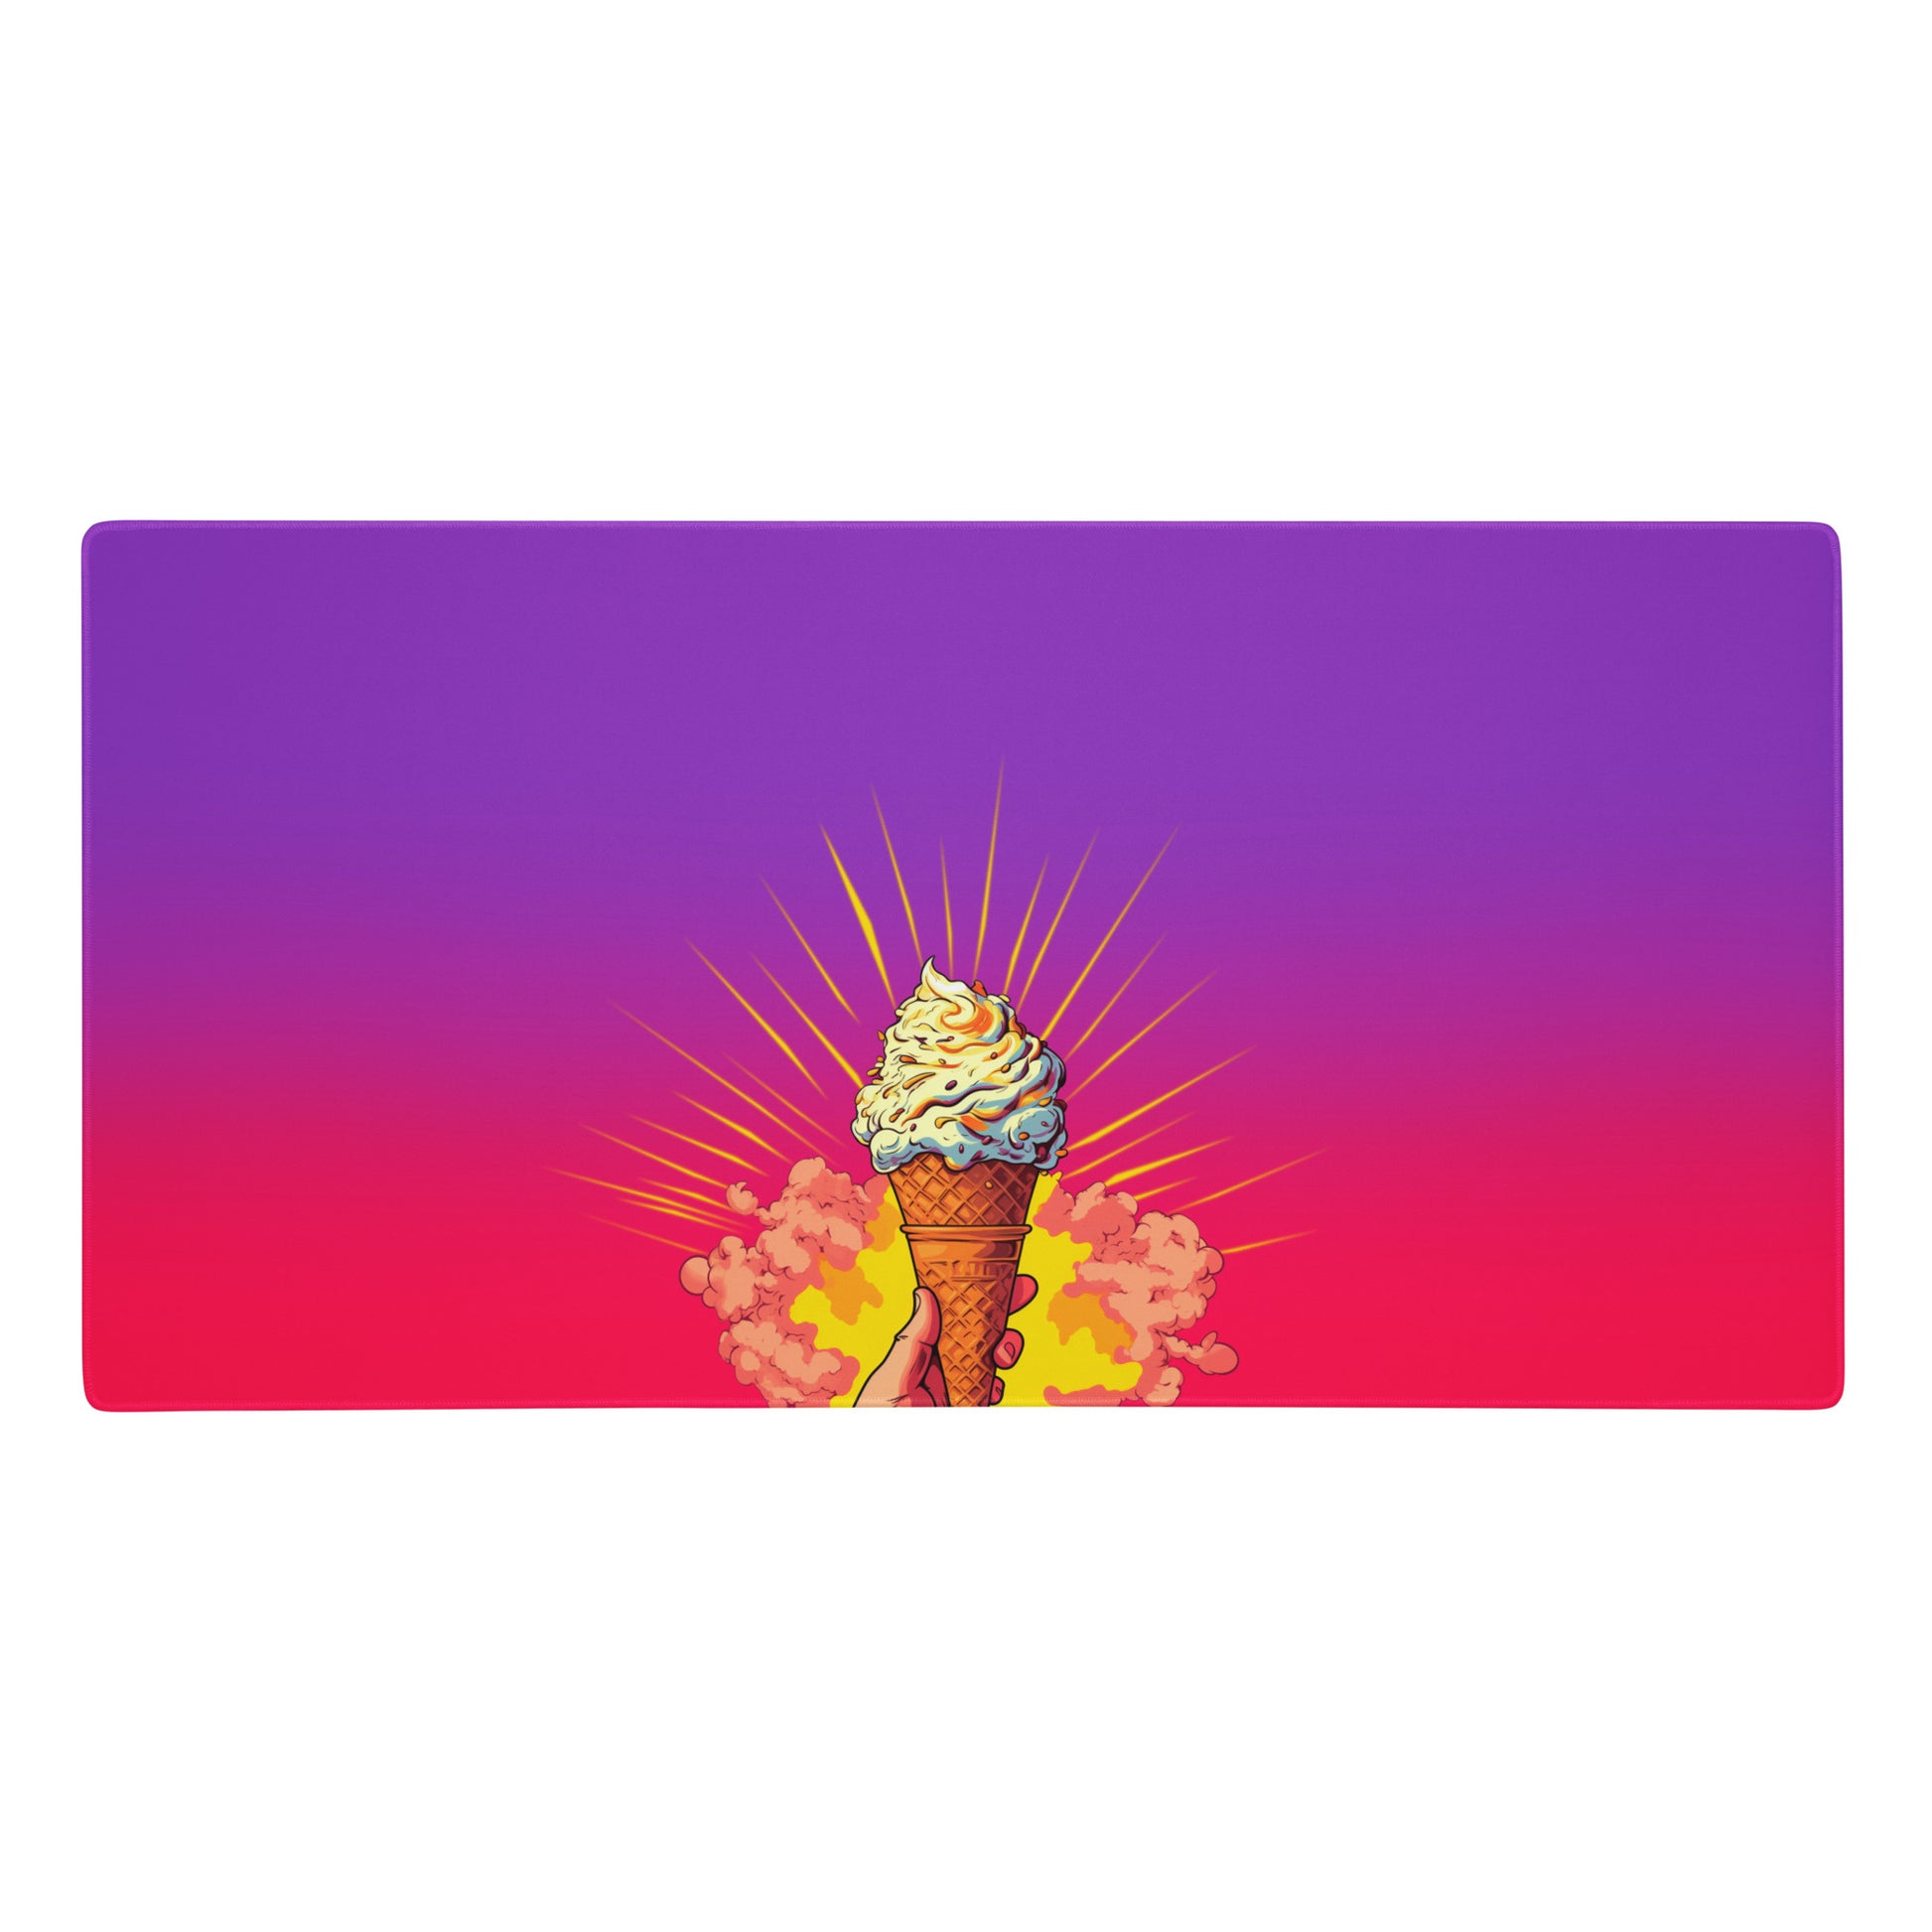 A 36" x 18" desk pad with a brightly colored ice cream cone in the middle of it. Pink and purple in color.